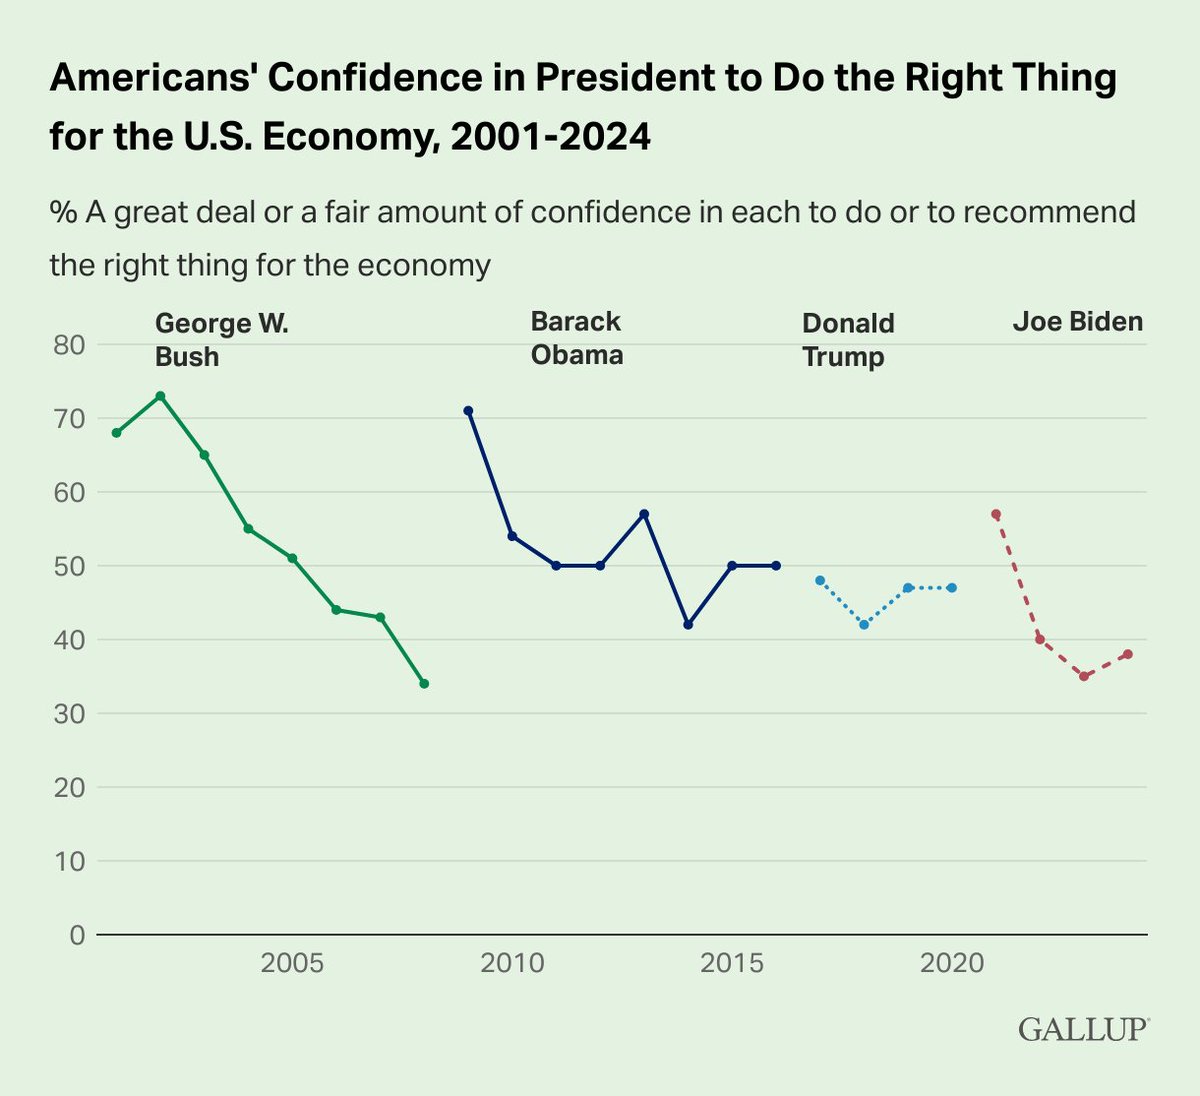 Confidence in Biden’s management of the economy is low compared with predecessors. New data: on.gallup.com/3UKDfTp